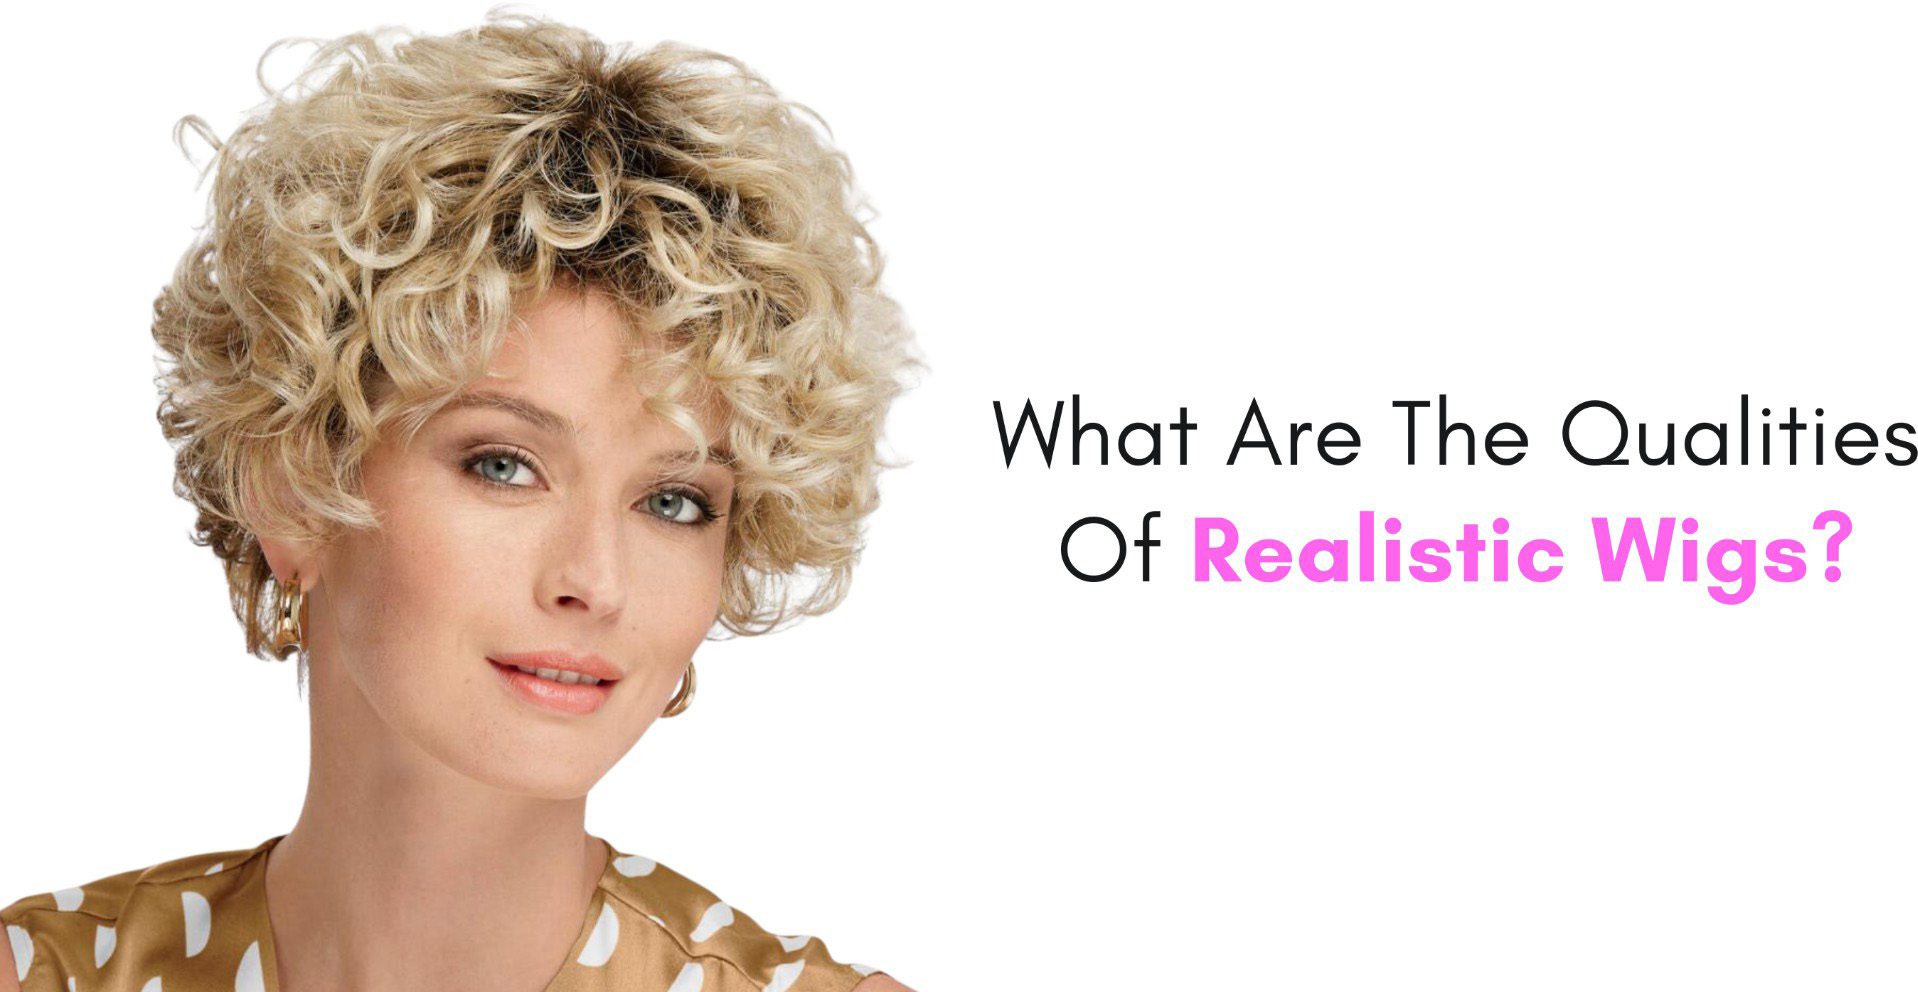 What Are The Qualities Of Realistic Wigs?